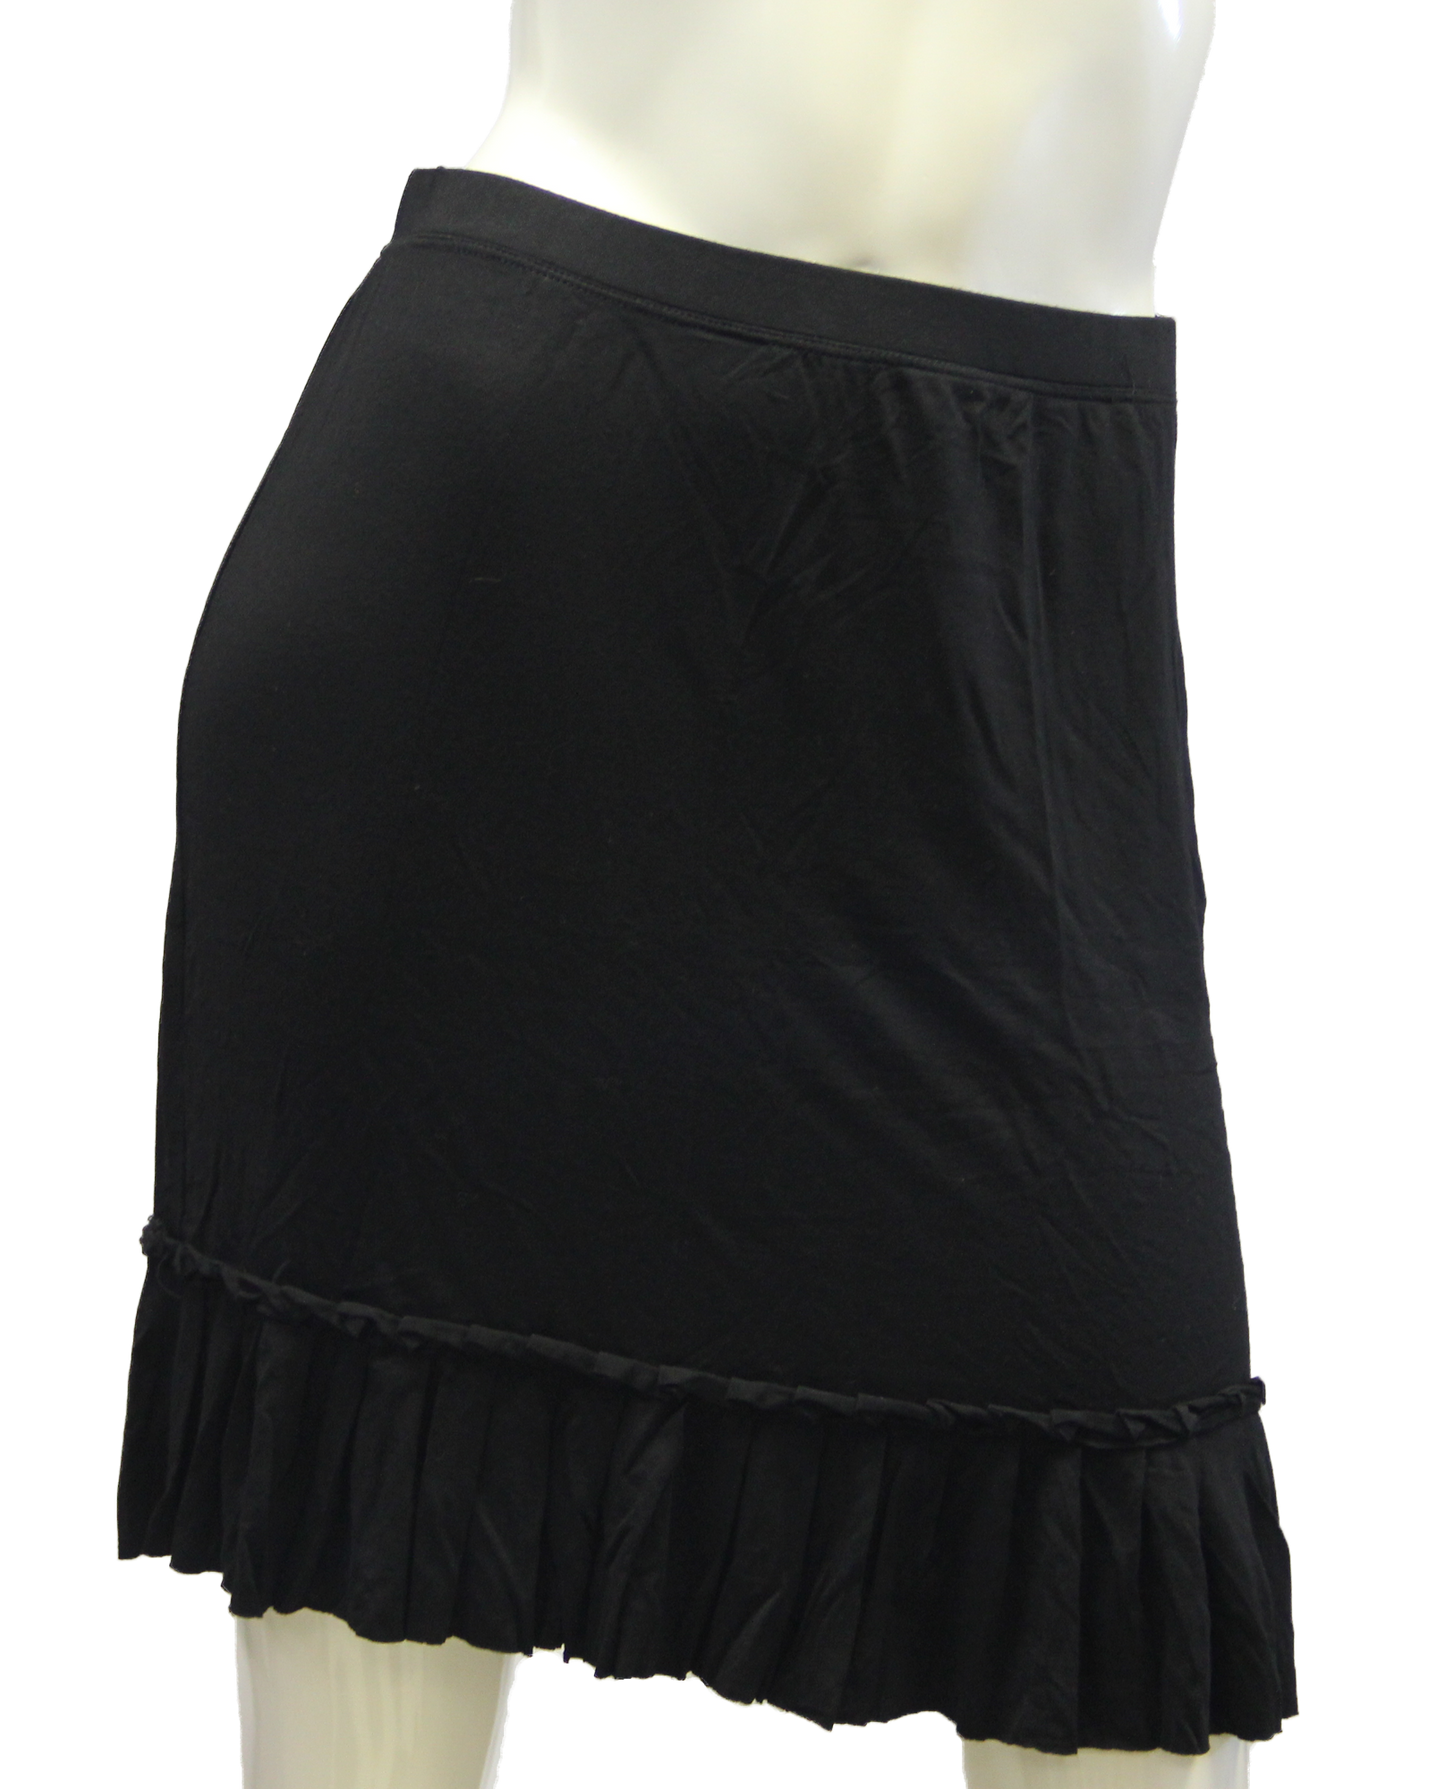 Load image into Gallery viewer, Shake It Comfy Black Skirt Size S (SKU 000026) - Designers On A Dime - 1
